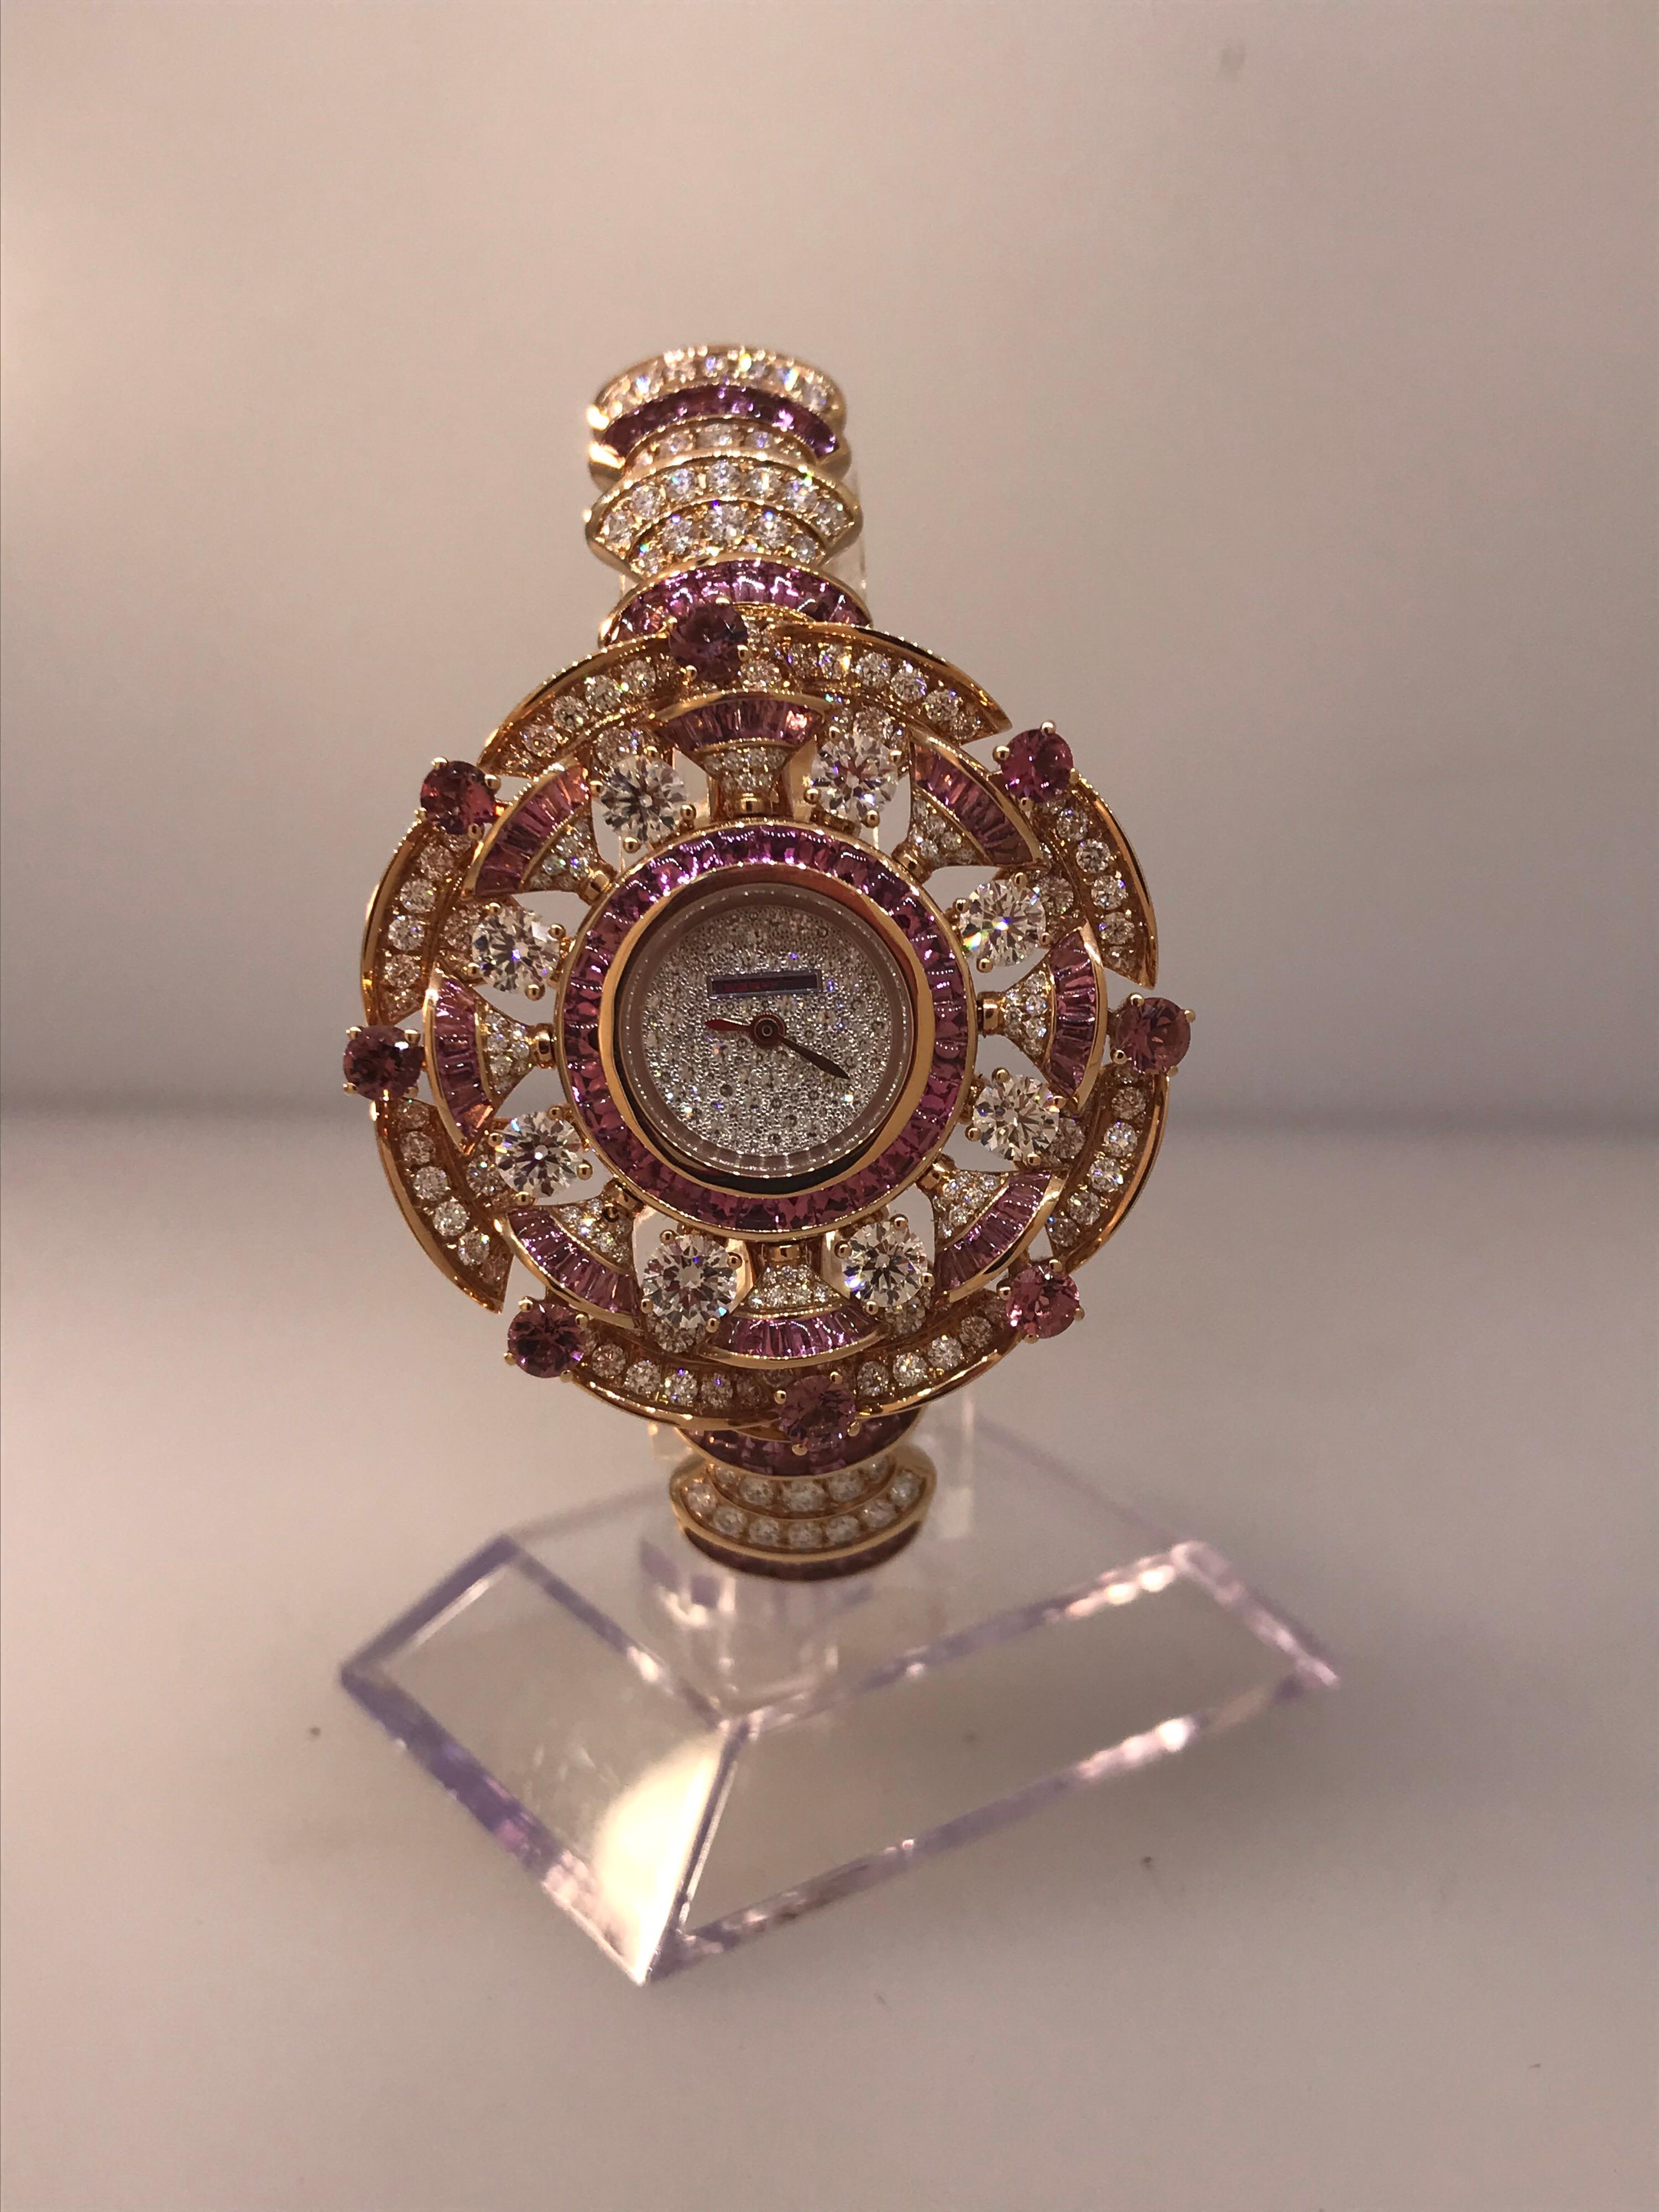 Bulgari Diva's Dream Rose Gold Diamonds and Rubellites Bracelet Ladies Watch In New Condition For Sale In New York, NY